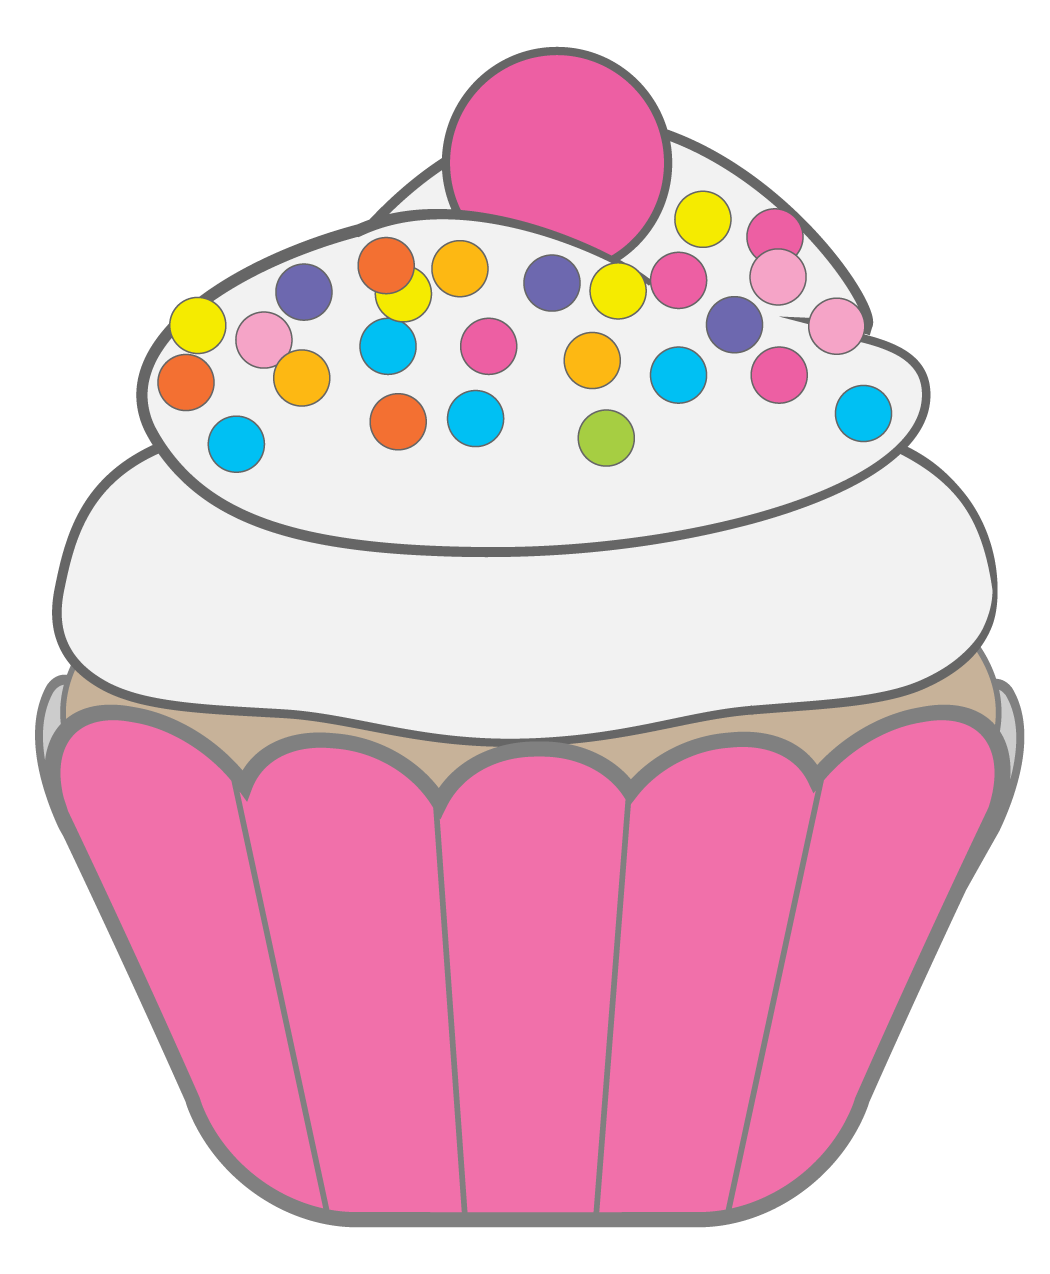 Cupcake Clipart Black And White | Clipart library - Free Clipart Images